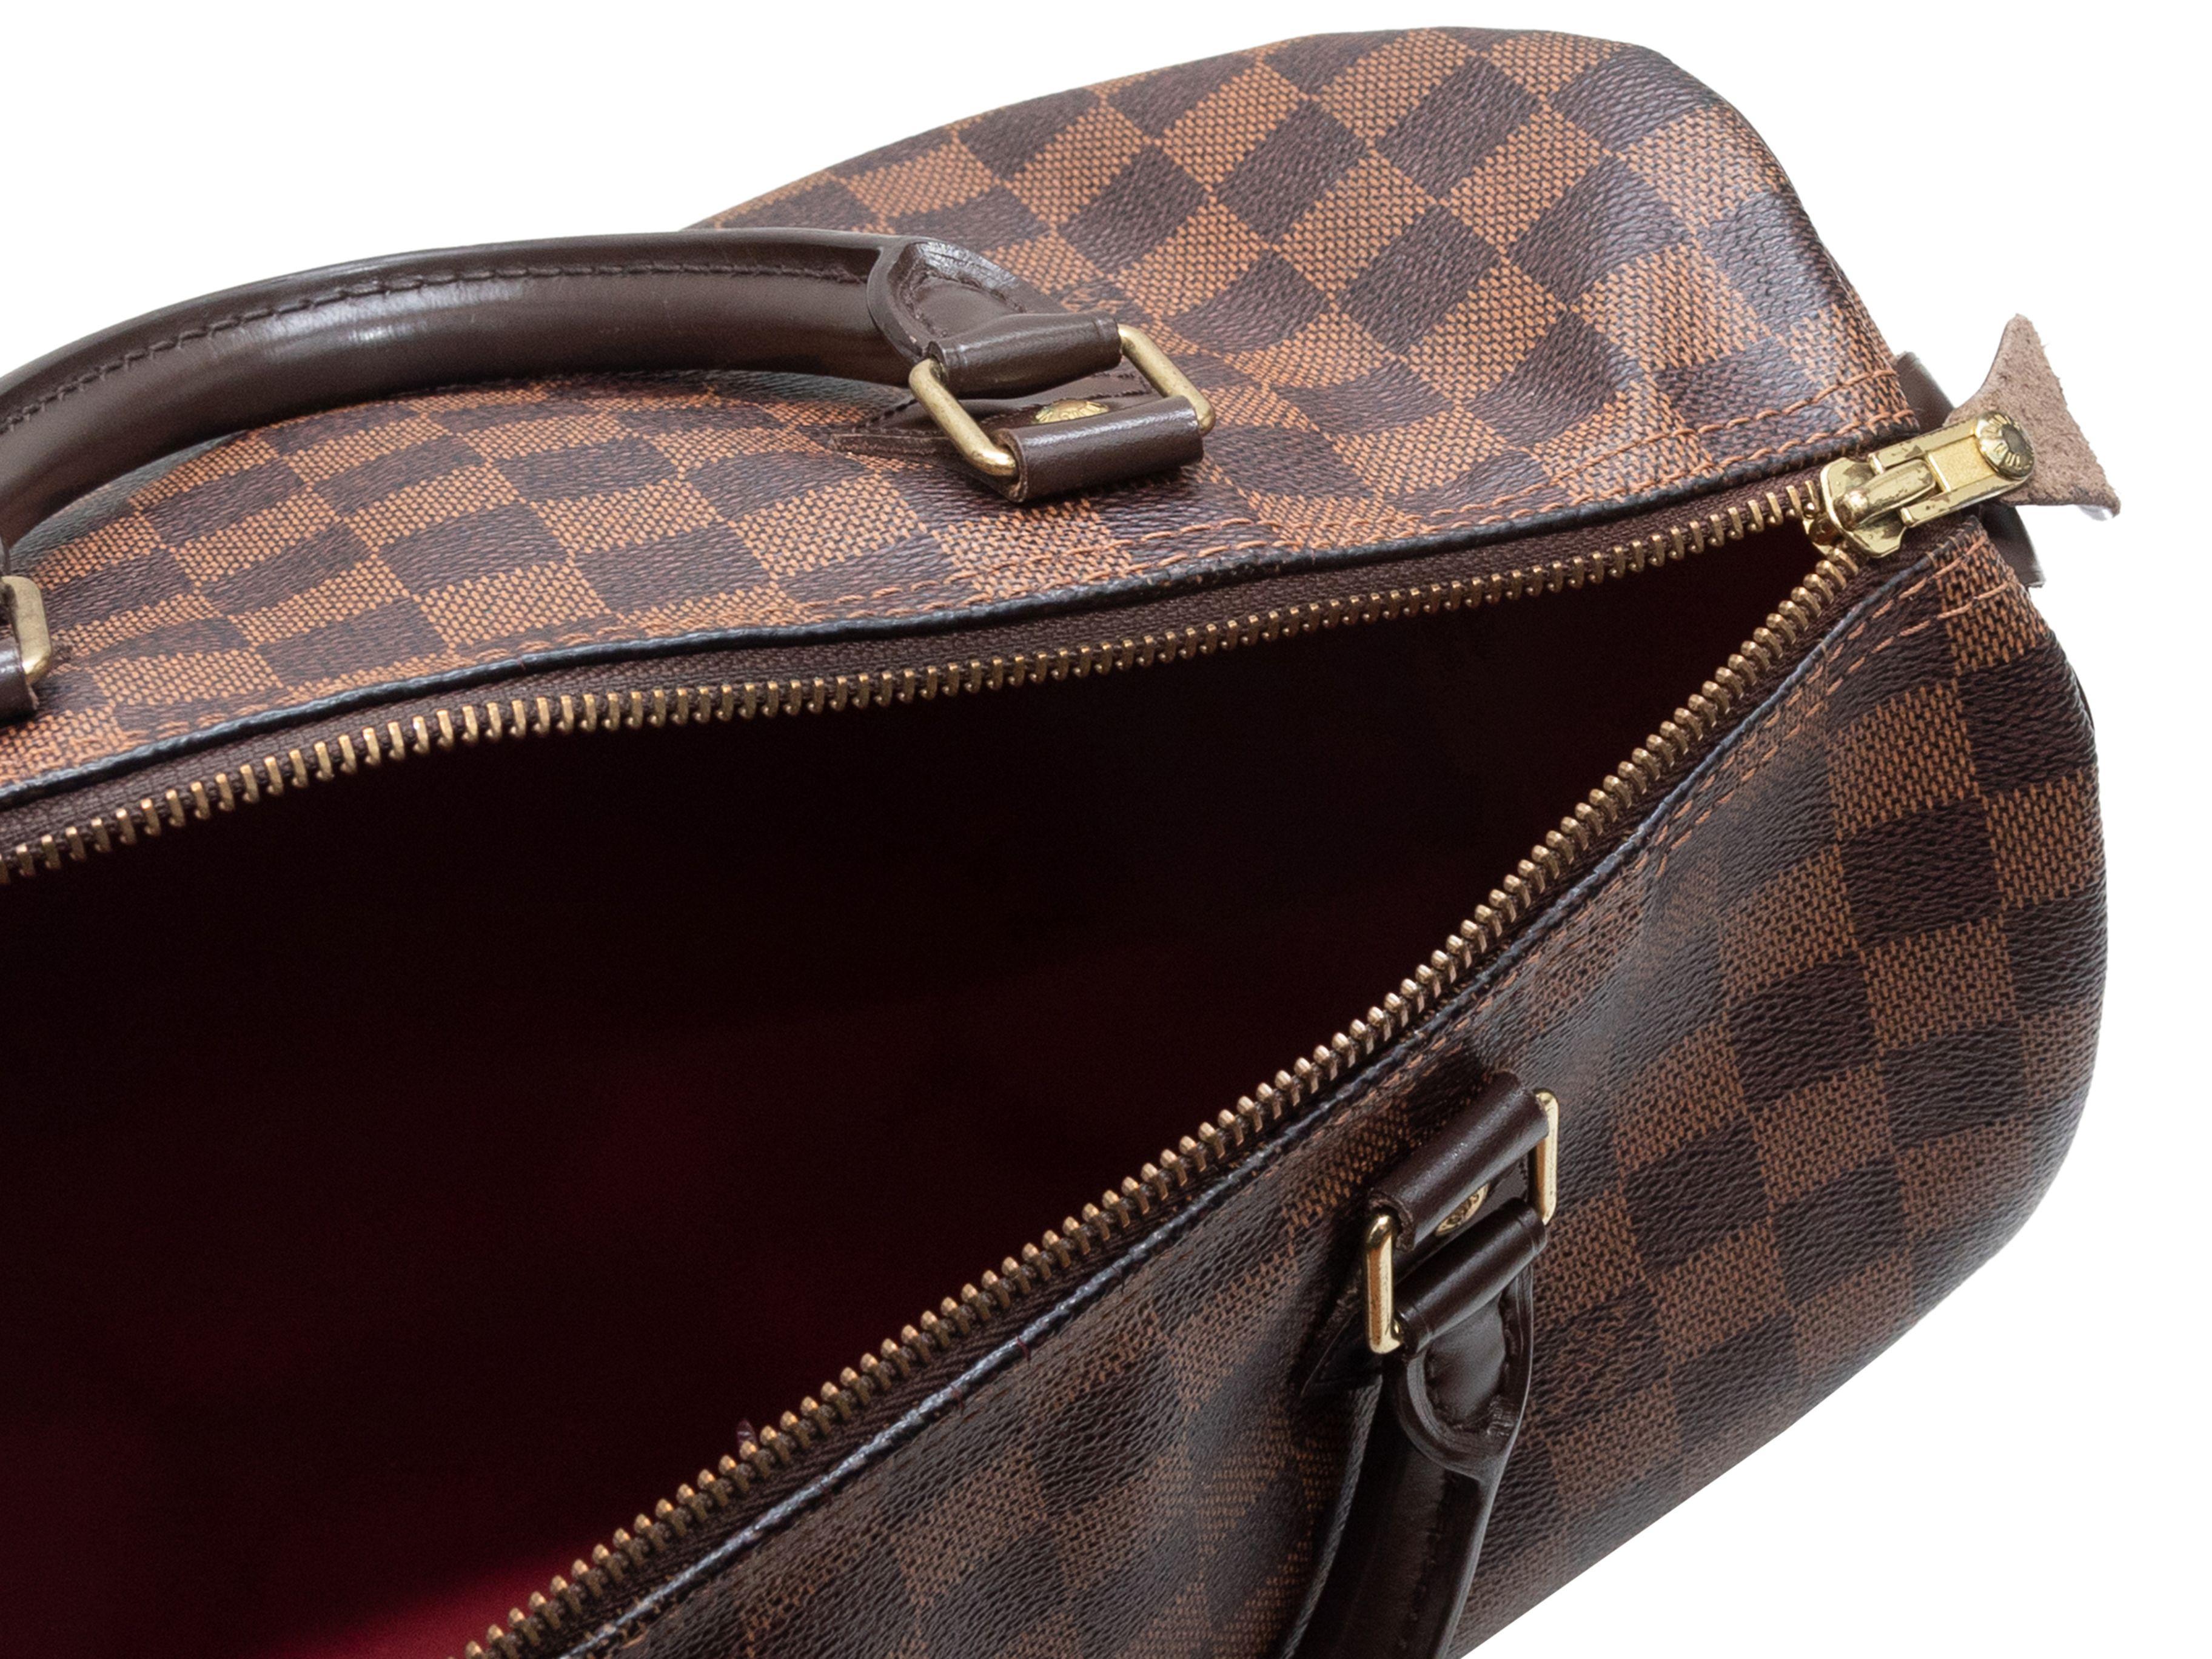 Product Details: Brown Louis Vuitton Damier Ebene Speedy 30 2011 Handbag. The Speedy 30 bag features a coated canvas body, gold-tone hardware, dual rolled top handles, and a top zip closure. 12